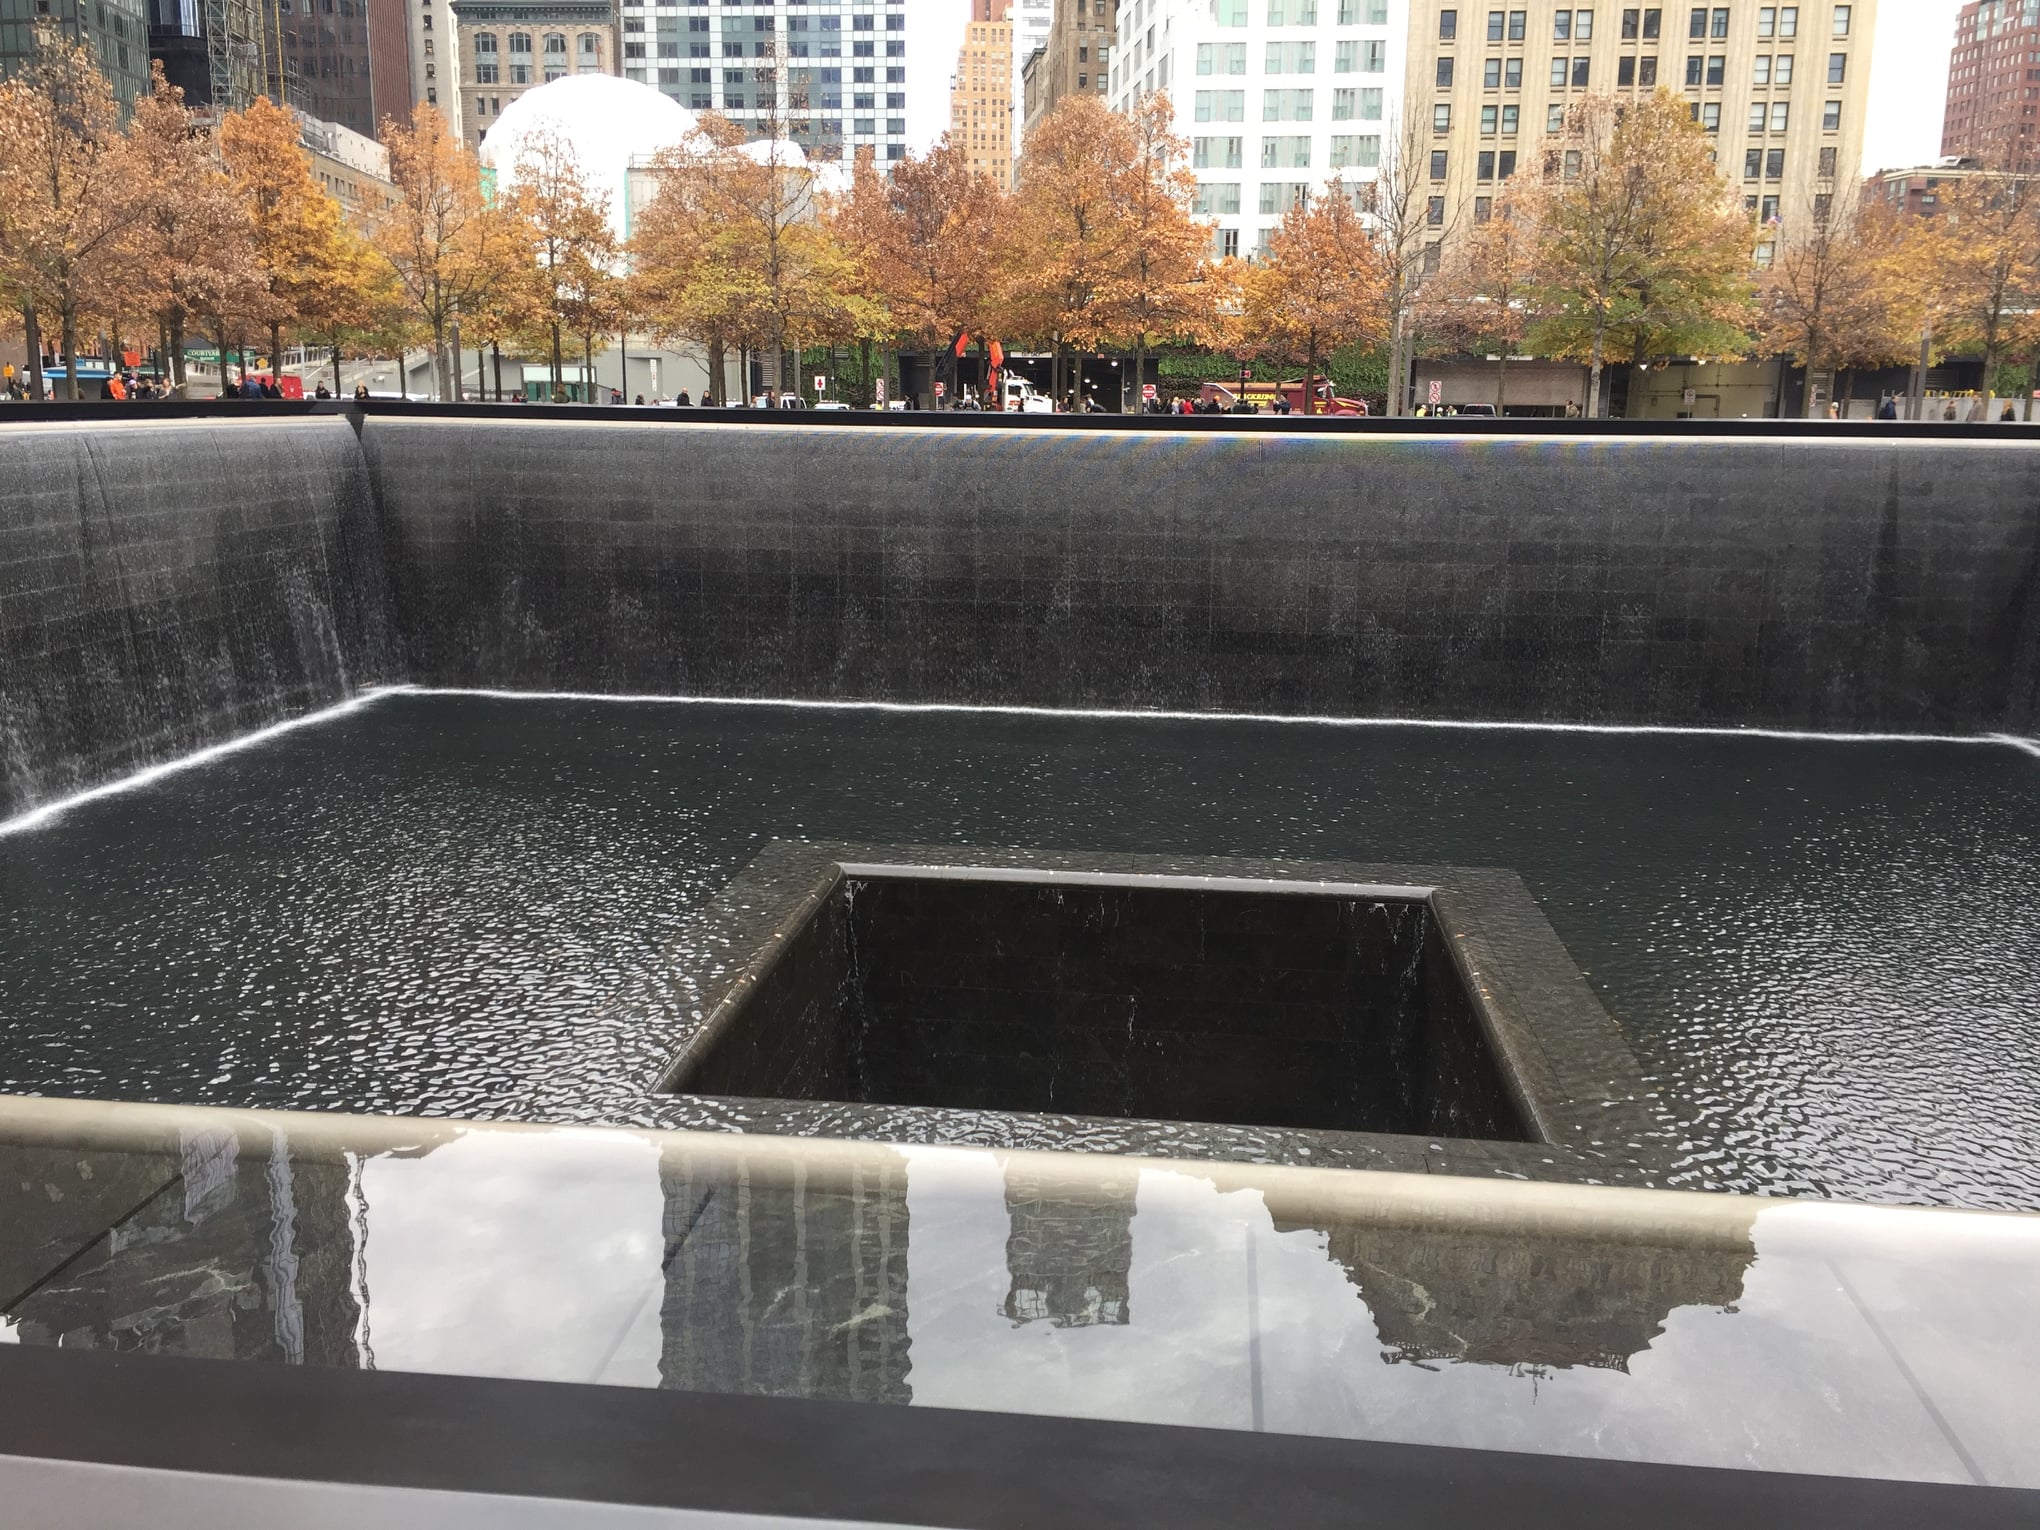 Water flows down four walls and disappears into a void at the center of a Memorial reflecting pool. Sunlight creates shadows on the pooled water.